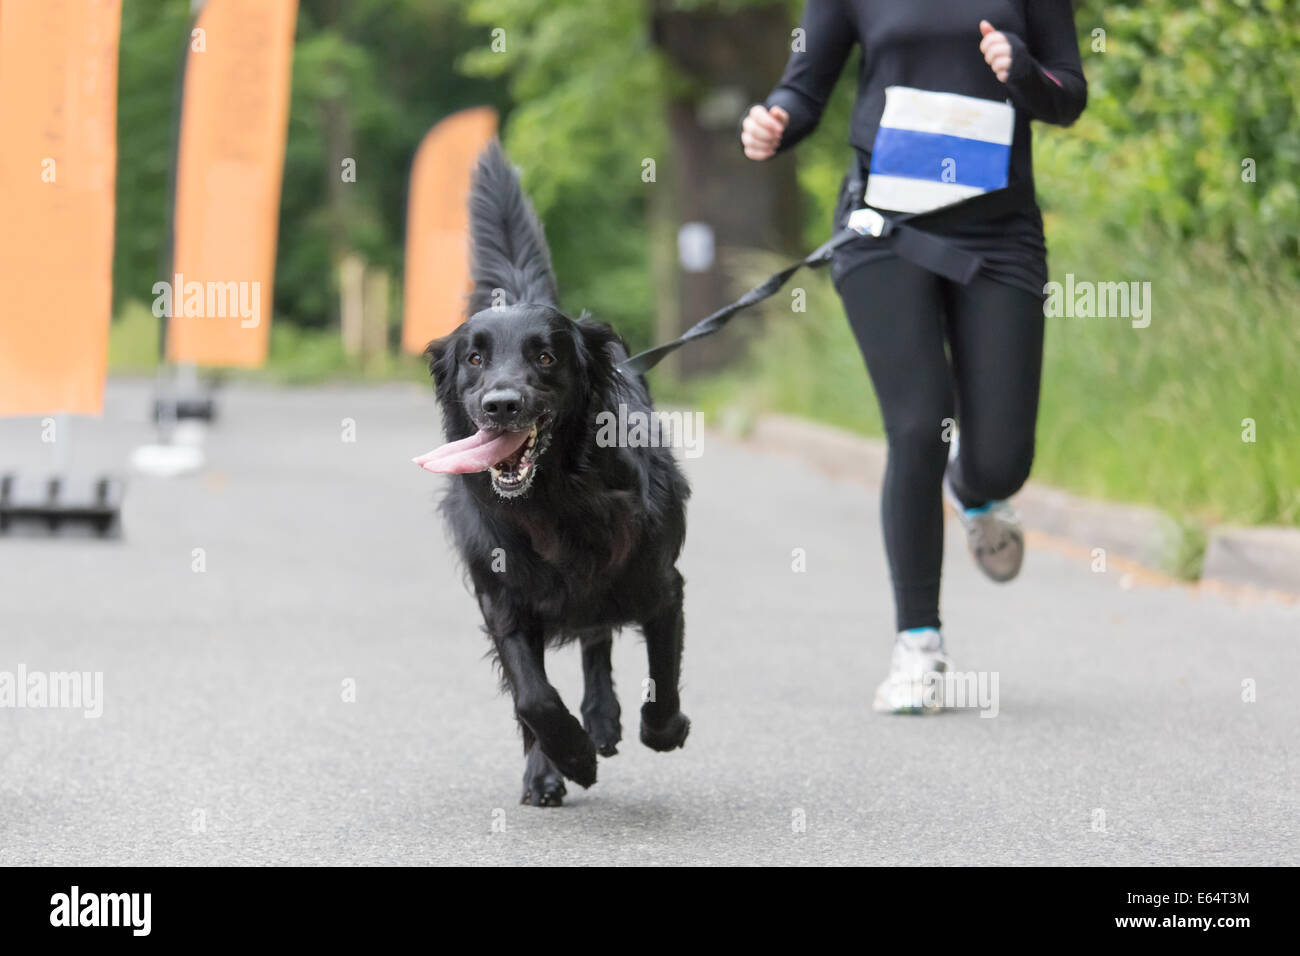 Dog and his owner are running together at a running event Stock Photo